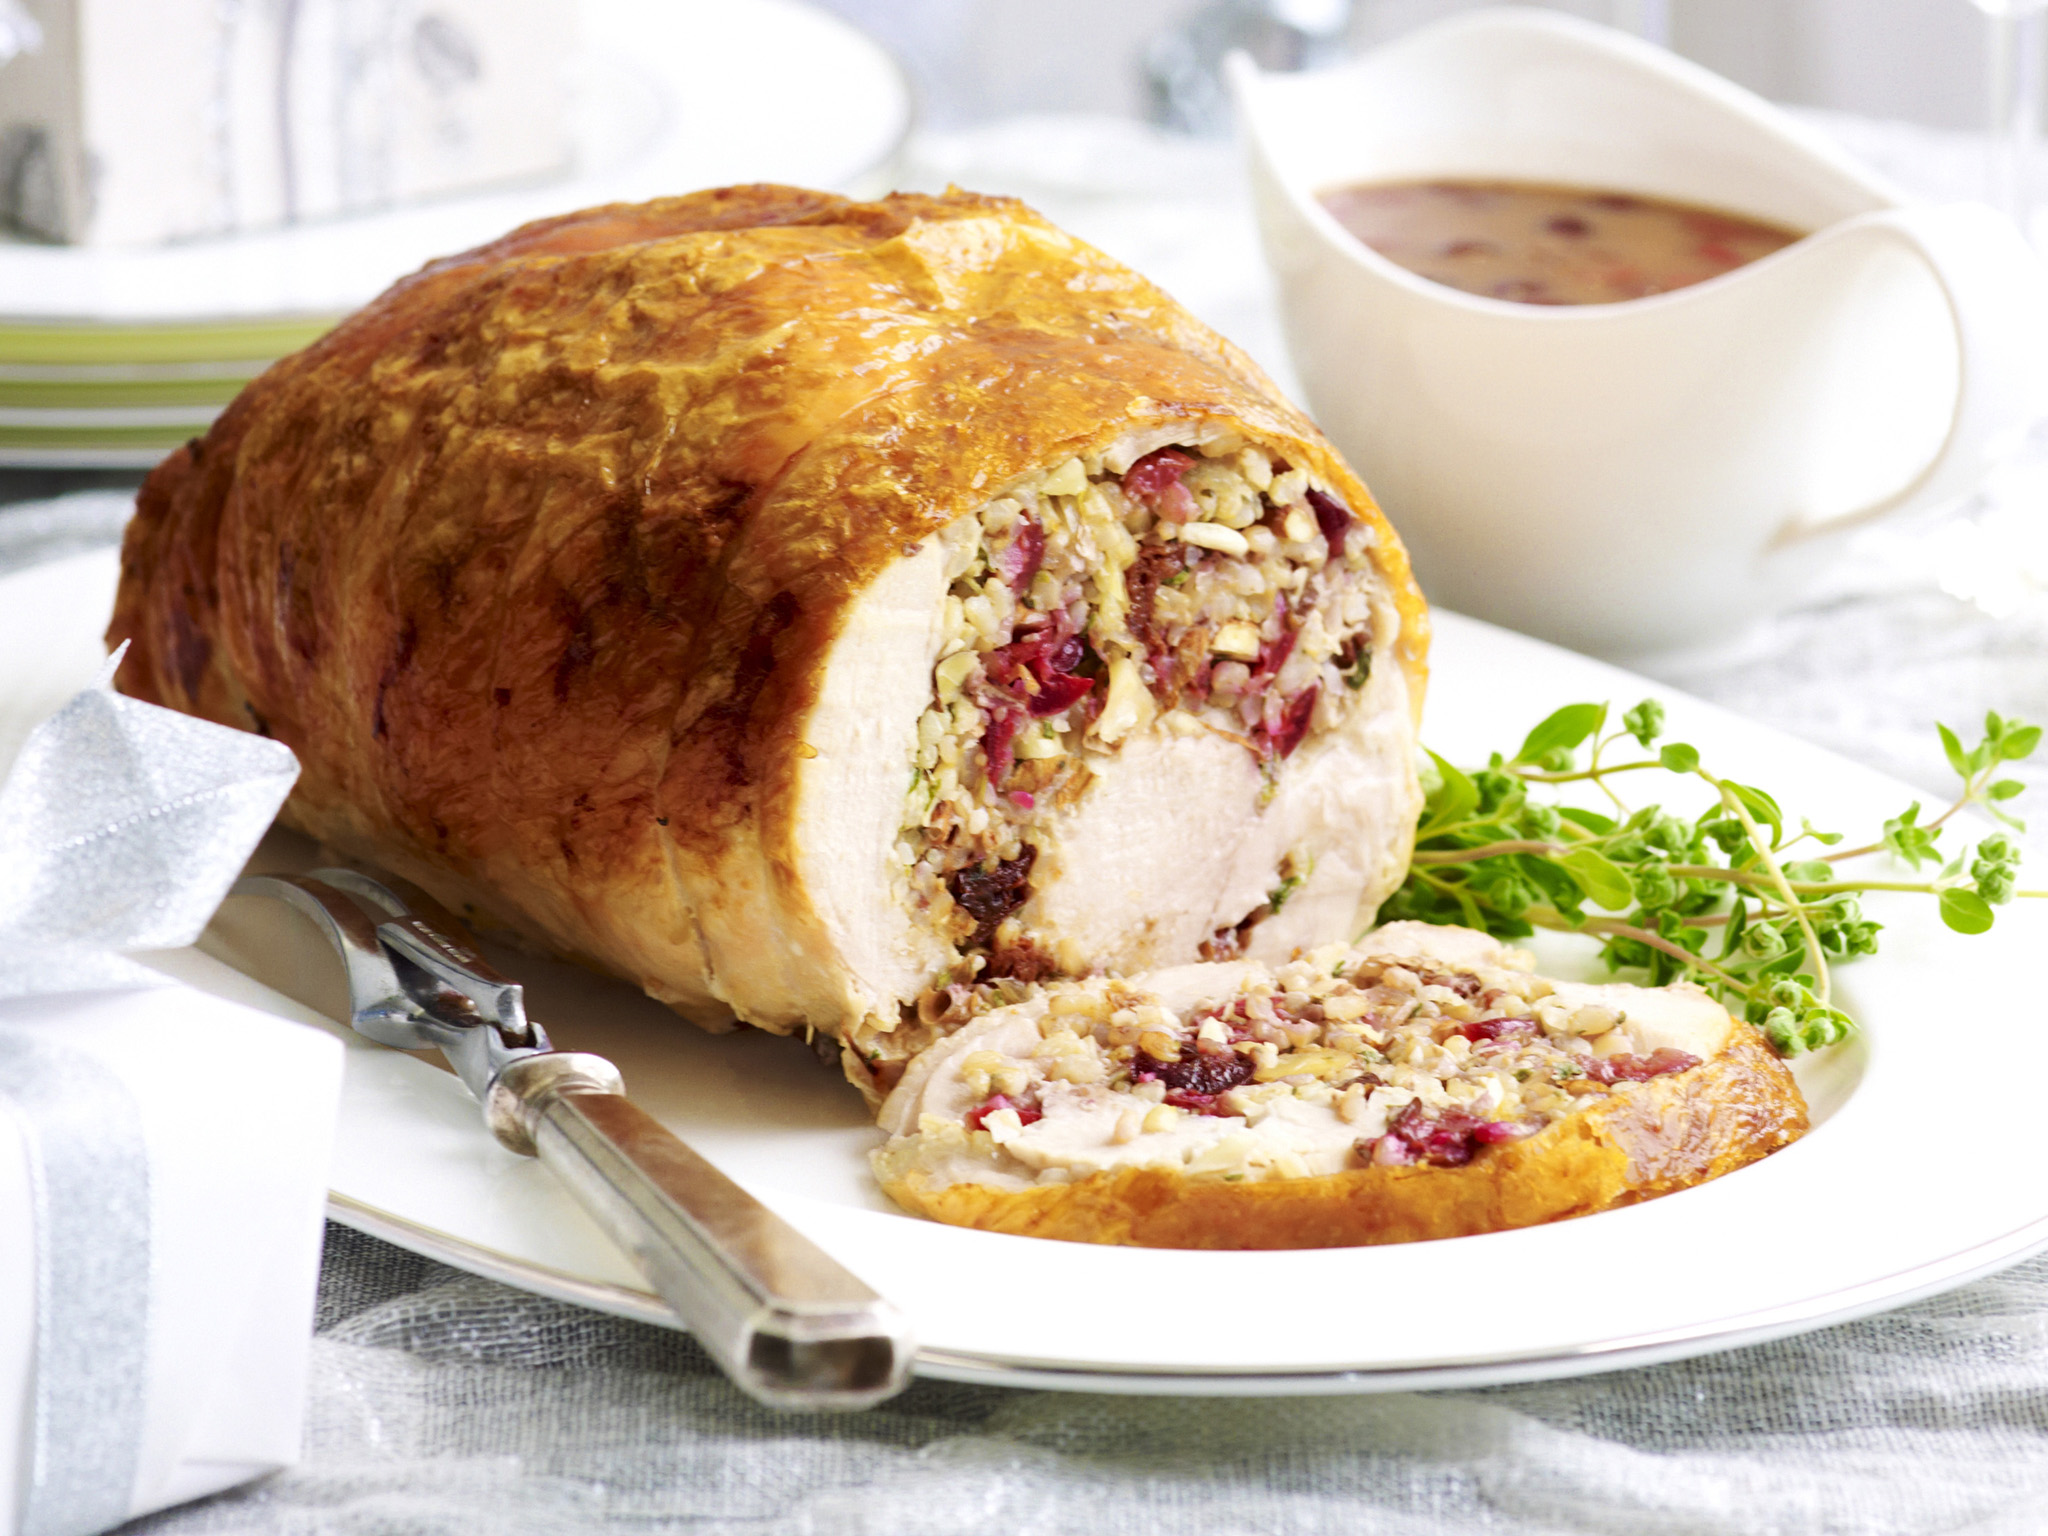 Turkey roll with cherry and almond stuffing